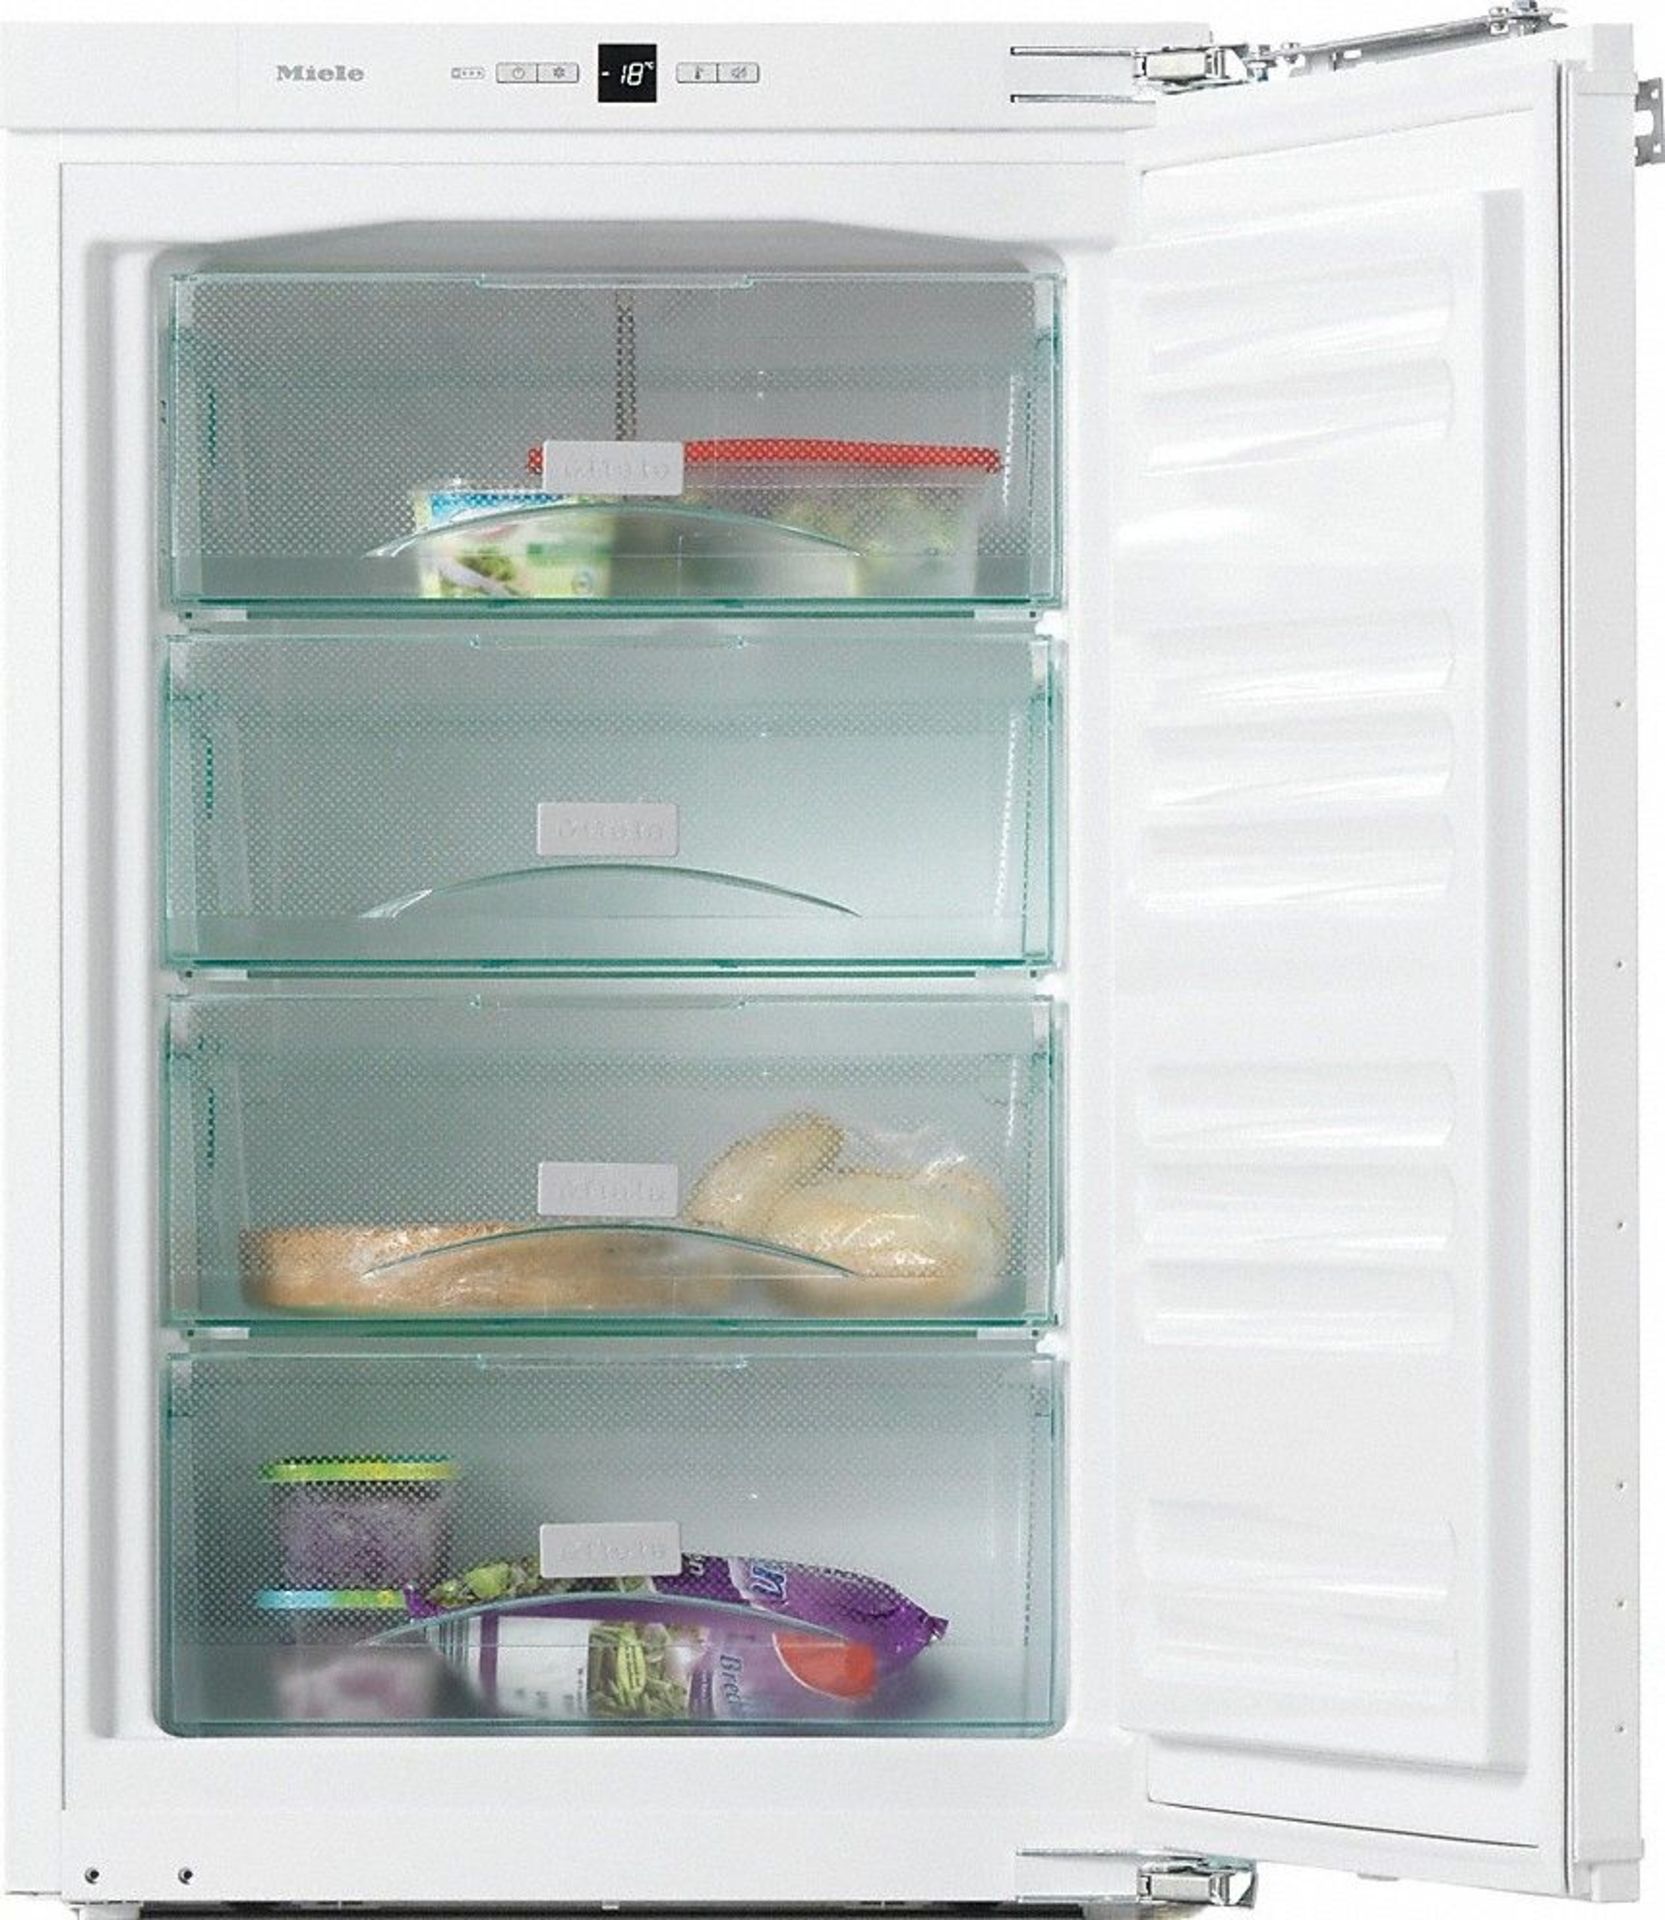 Miele F 32202 i Built in Freezer. - H/S. RRP £899.99. Built-in freezer with VarioRoom and four - Image 2 of 2